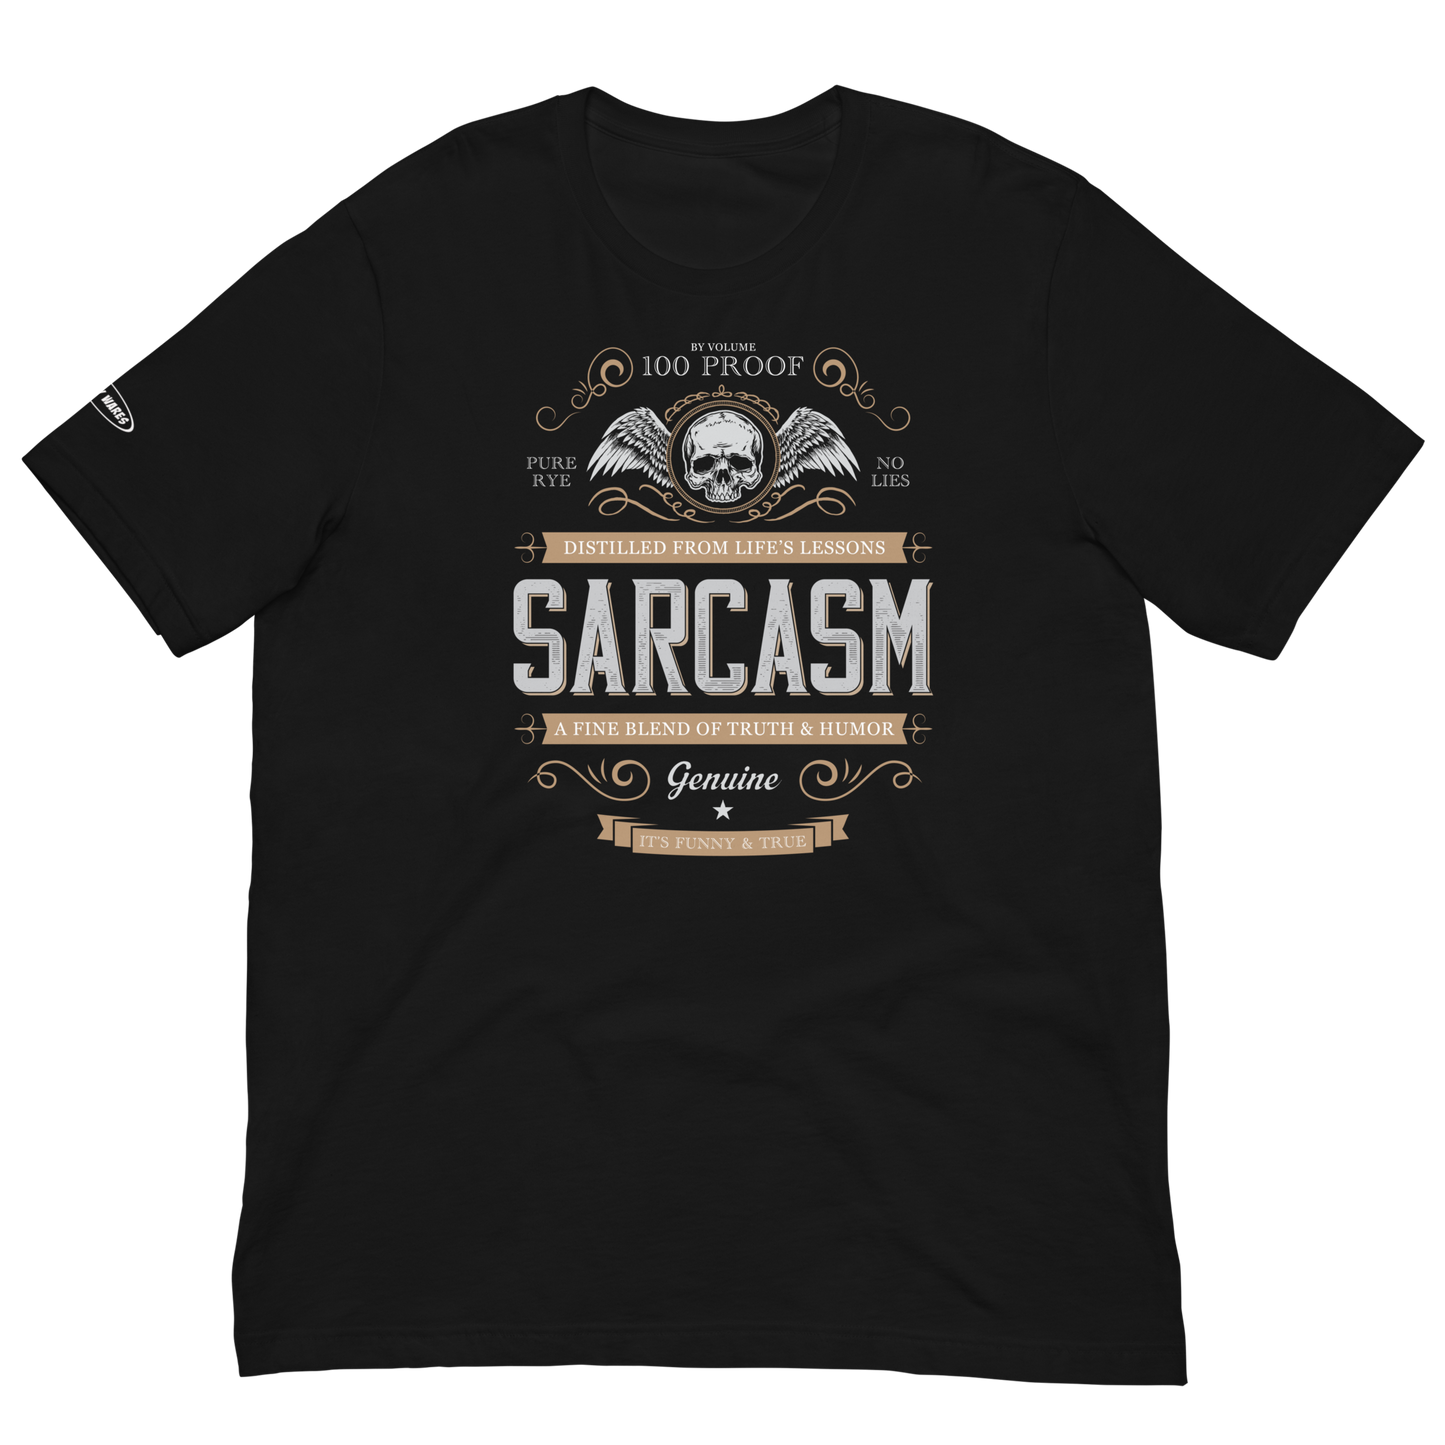 Unisex - 100 PROOF, PURE RYE SARCASM - Funny T-shirt